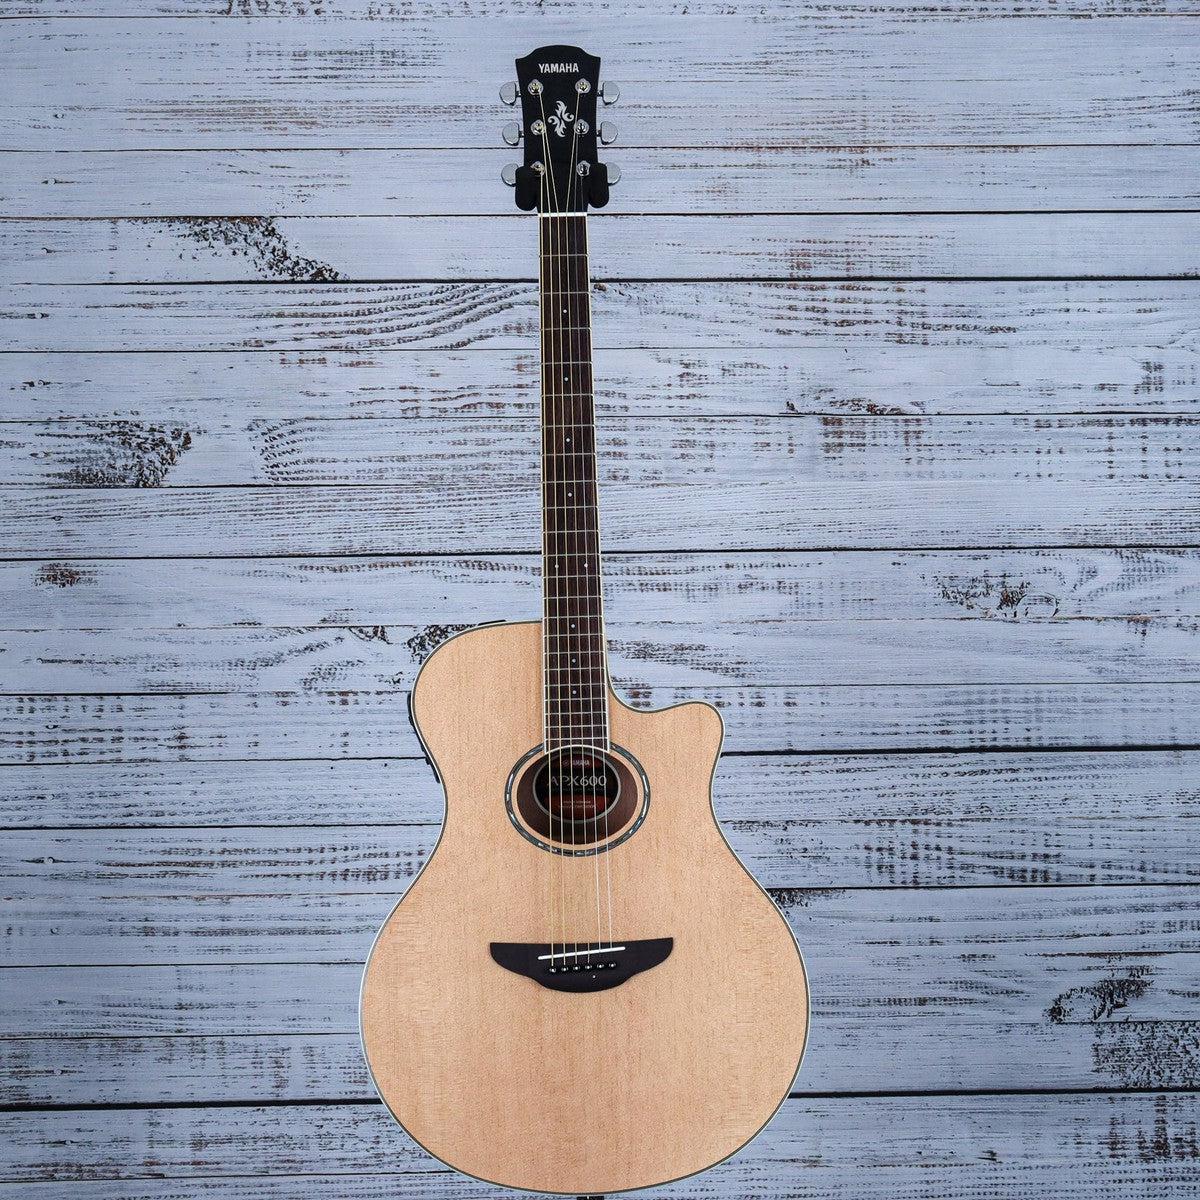 Yamaha APX600 Thin Body Acoustic-Electric Guitar - Natural w/ Gig